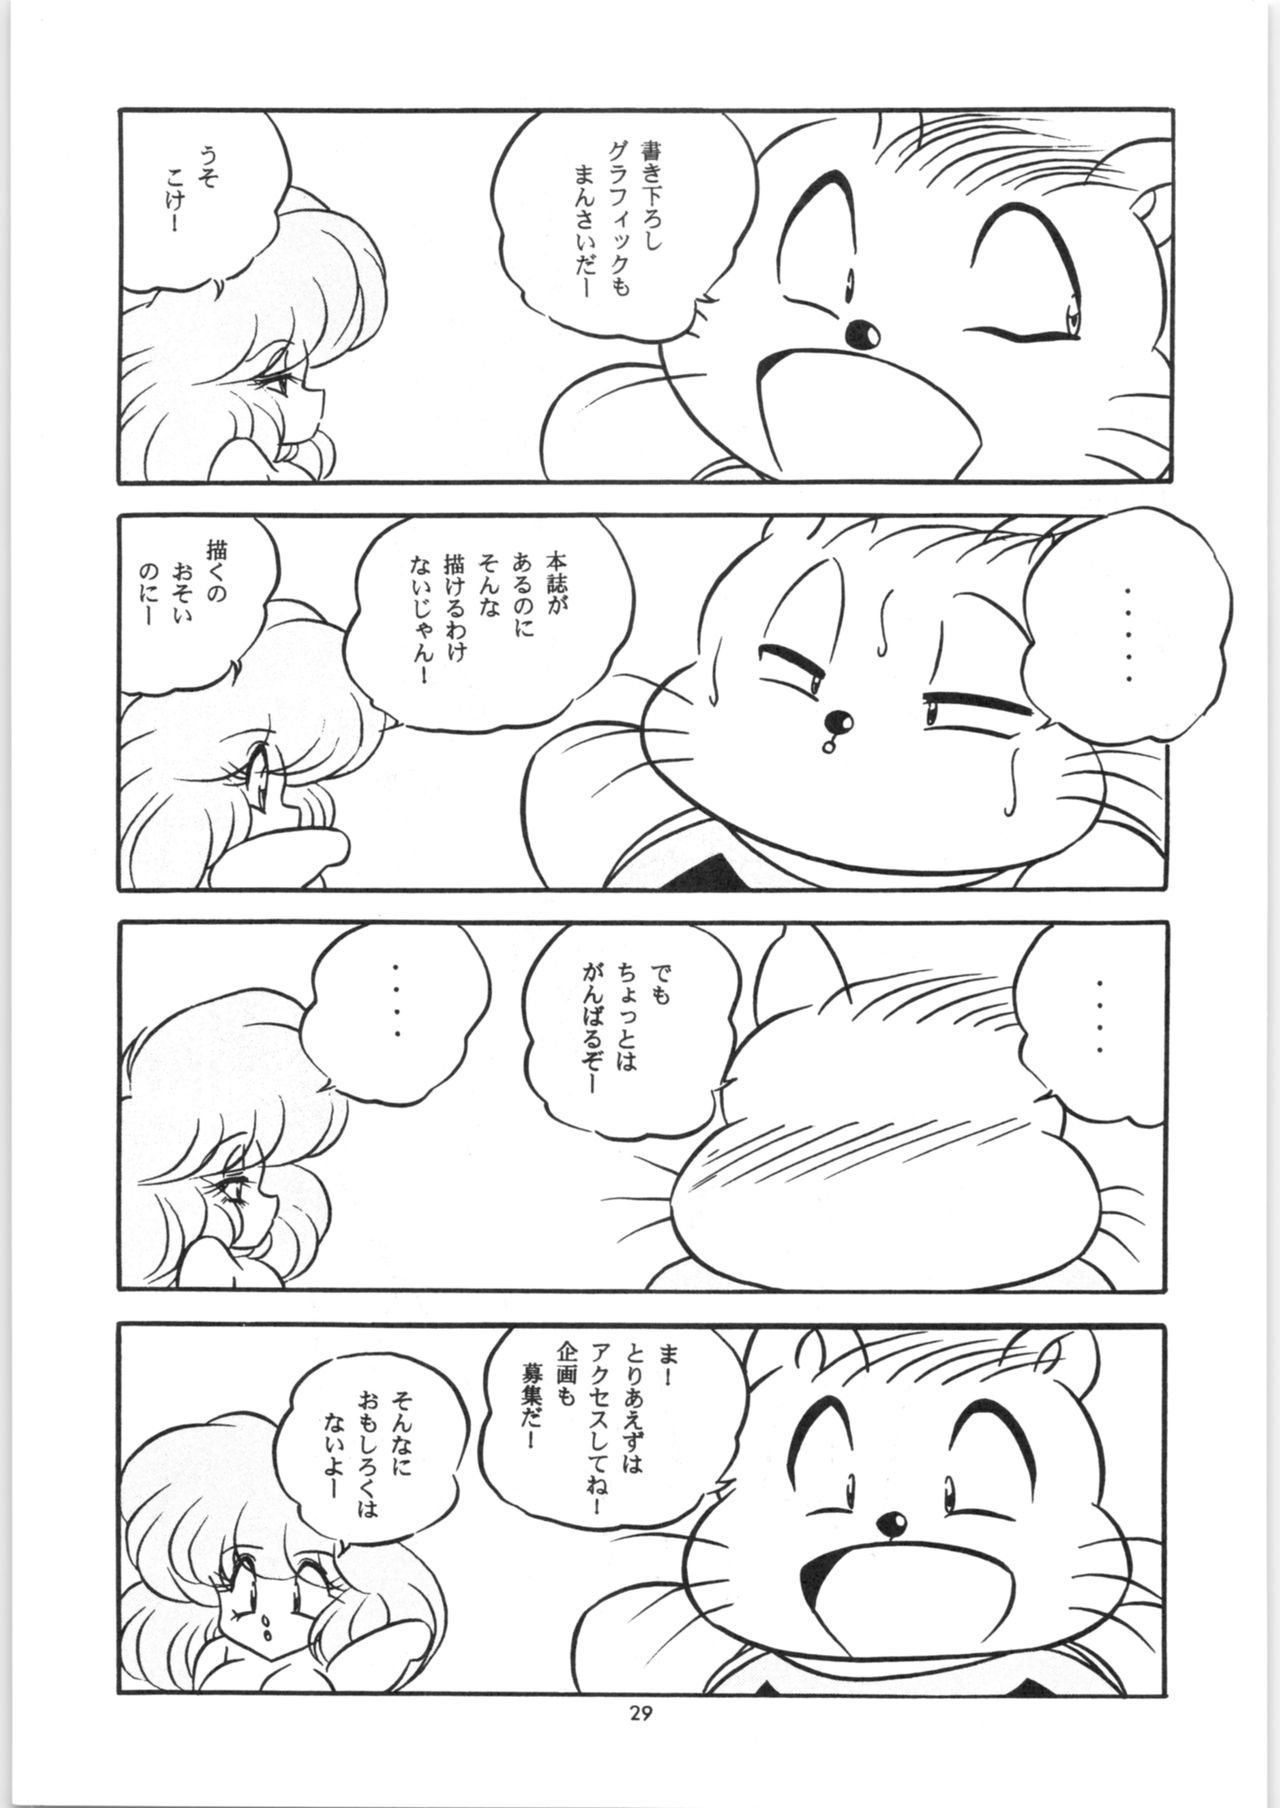 [C-COMPANY] C-COMPANY SPECIAL STAGE 18 (Ranma 1/2, Idol Project) page 30 full